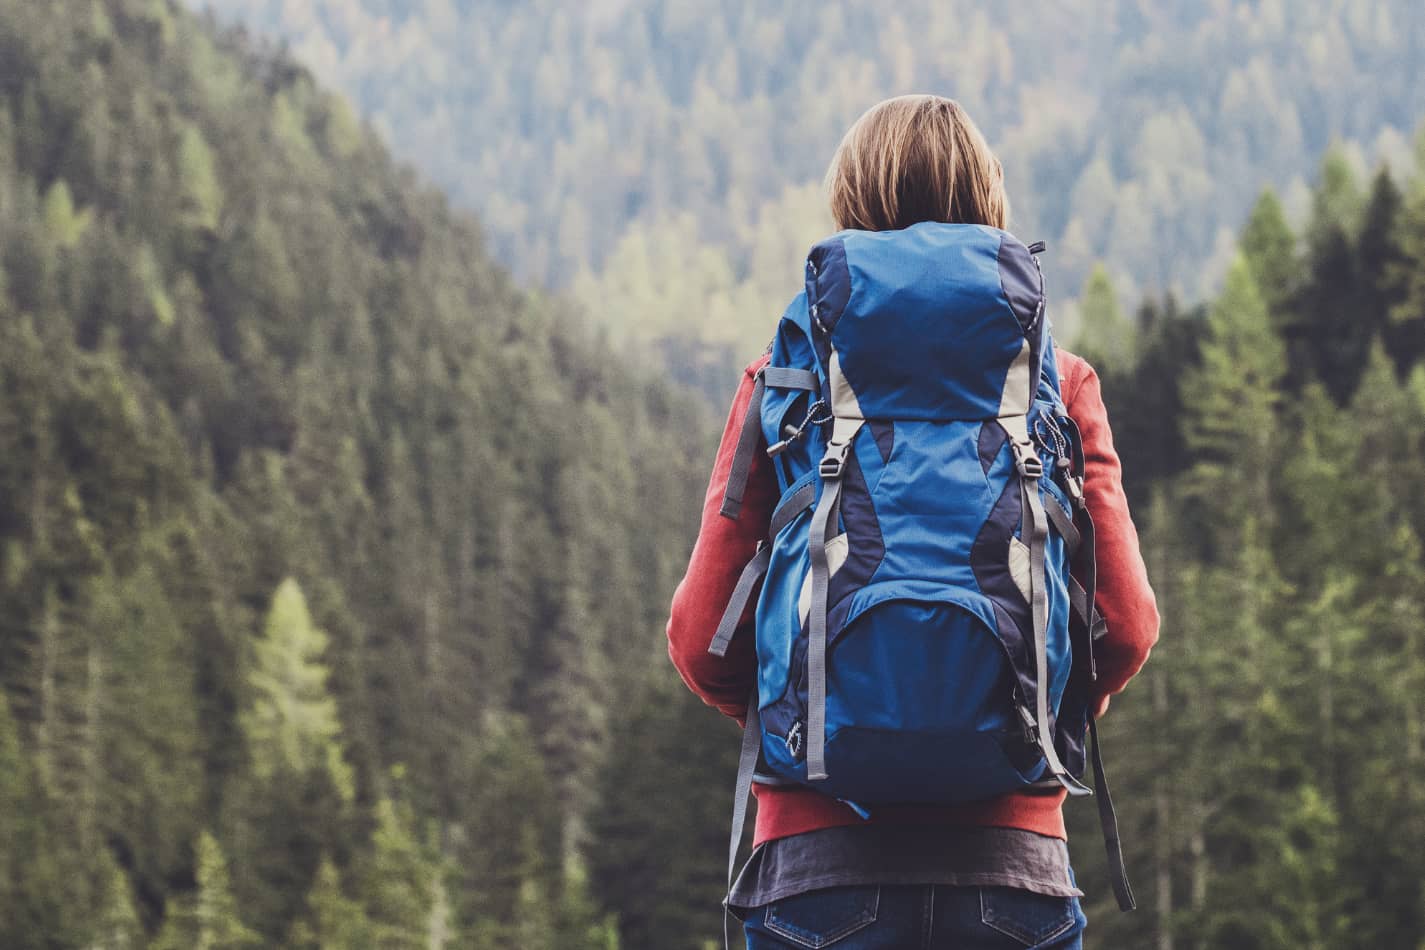 Woman with a blue lightweight backpack and what appears to be a manageable base weight to hike longer distances with more comfort.